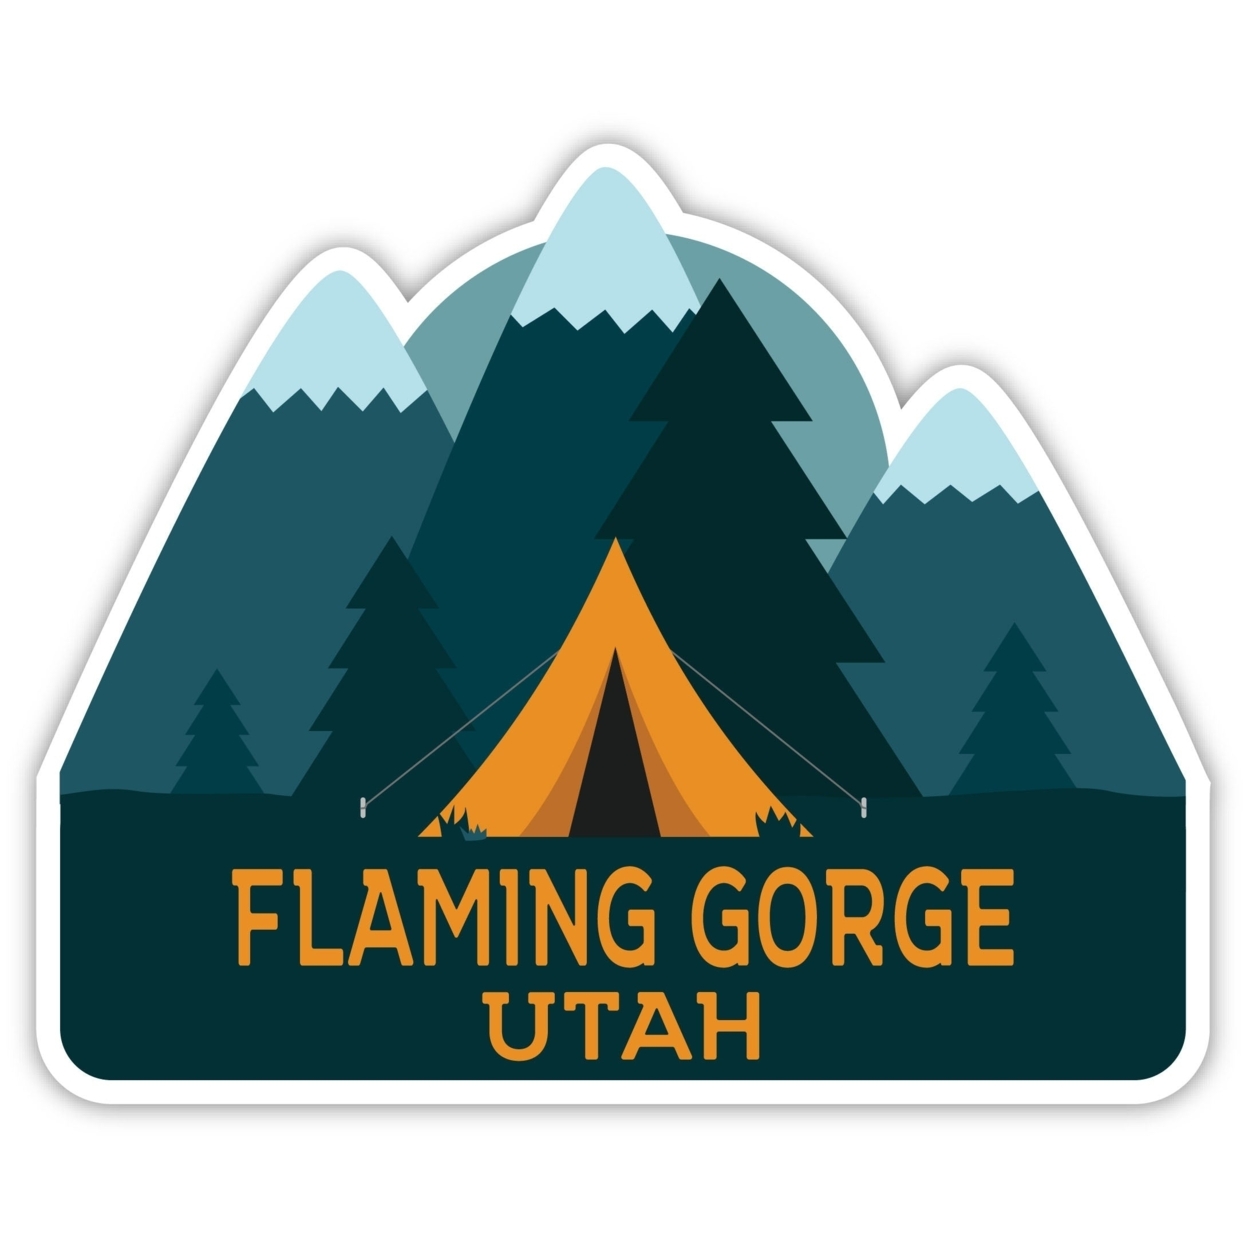 Flaming Gorge Utah Souvenir Decorative Stickers (Choose Theme And Size) - 4-Pack, 12-Inch, Tent